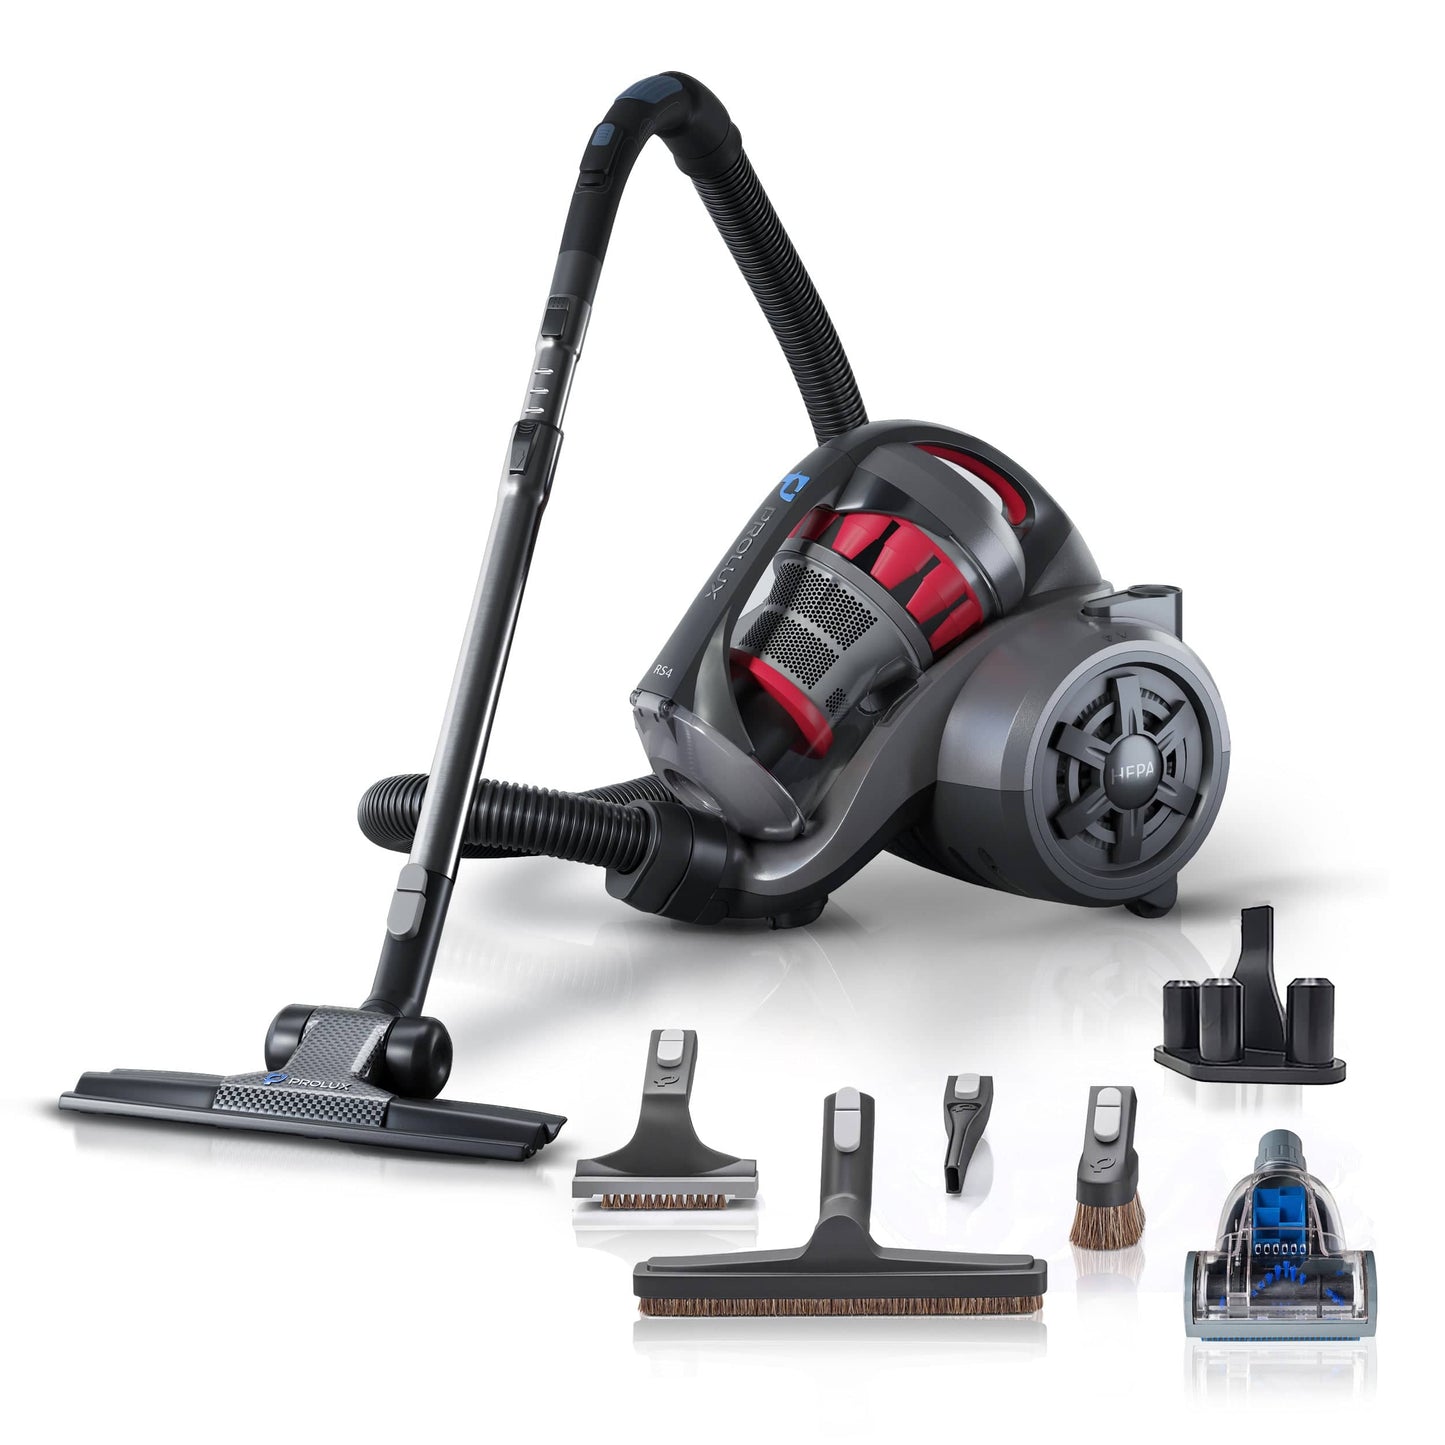 DEMO Prolux RS4 Turbo Nozzle Bagless Canister Vacuum